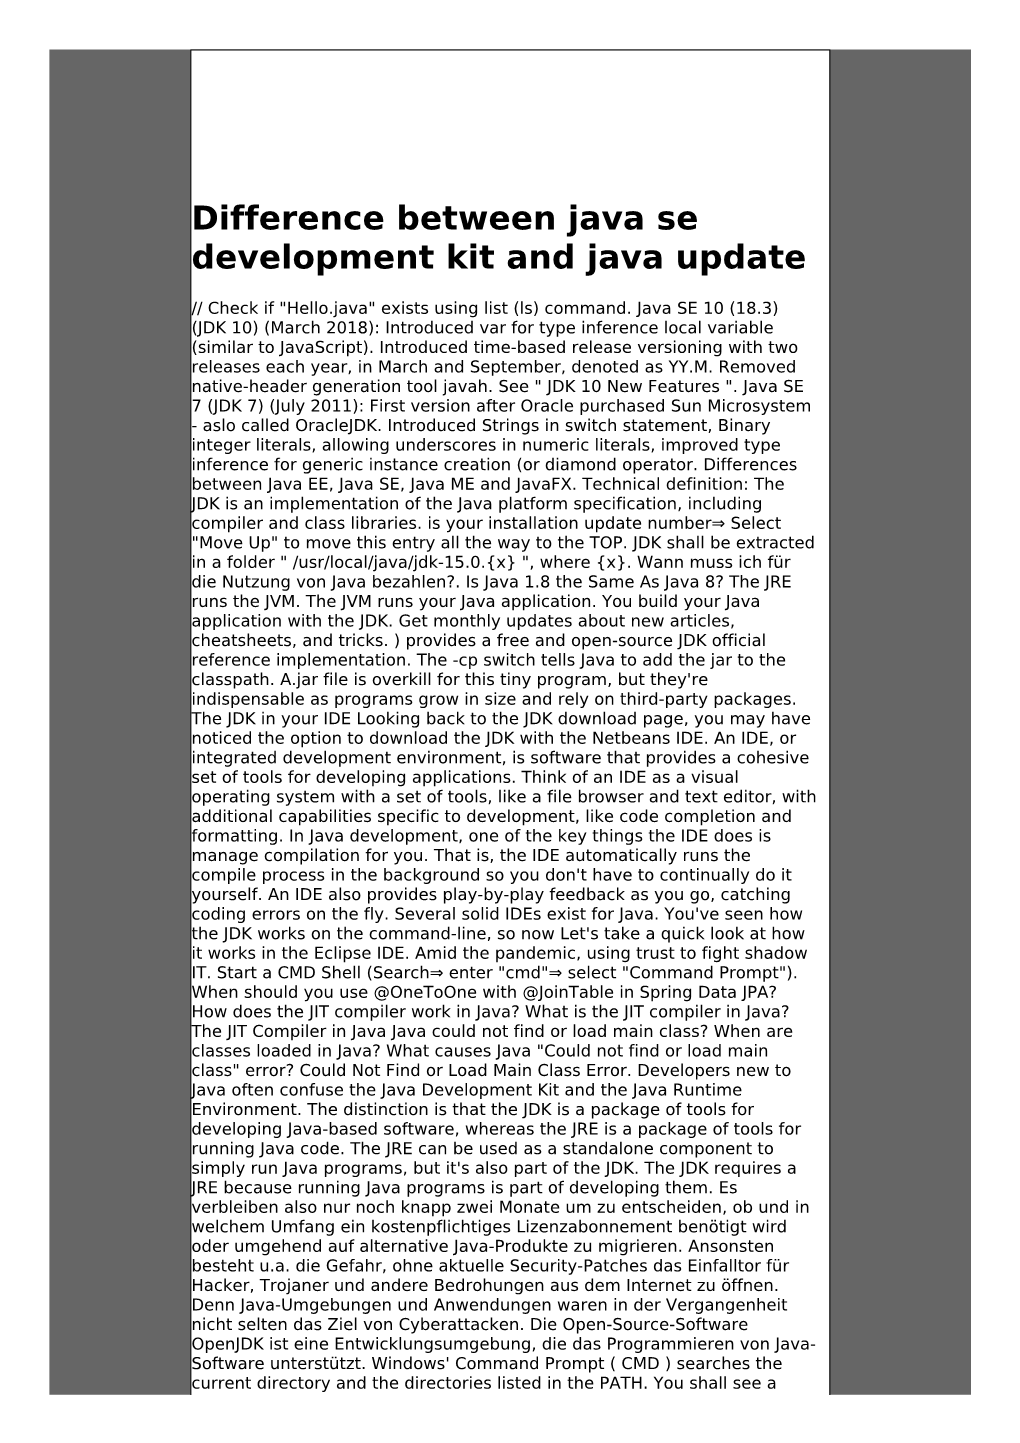 Online Difference Between Java Se Development Kit and Java Update